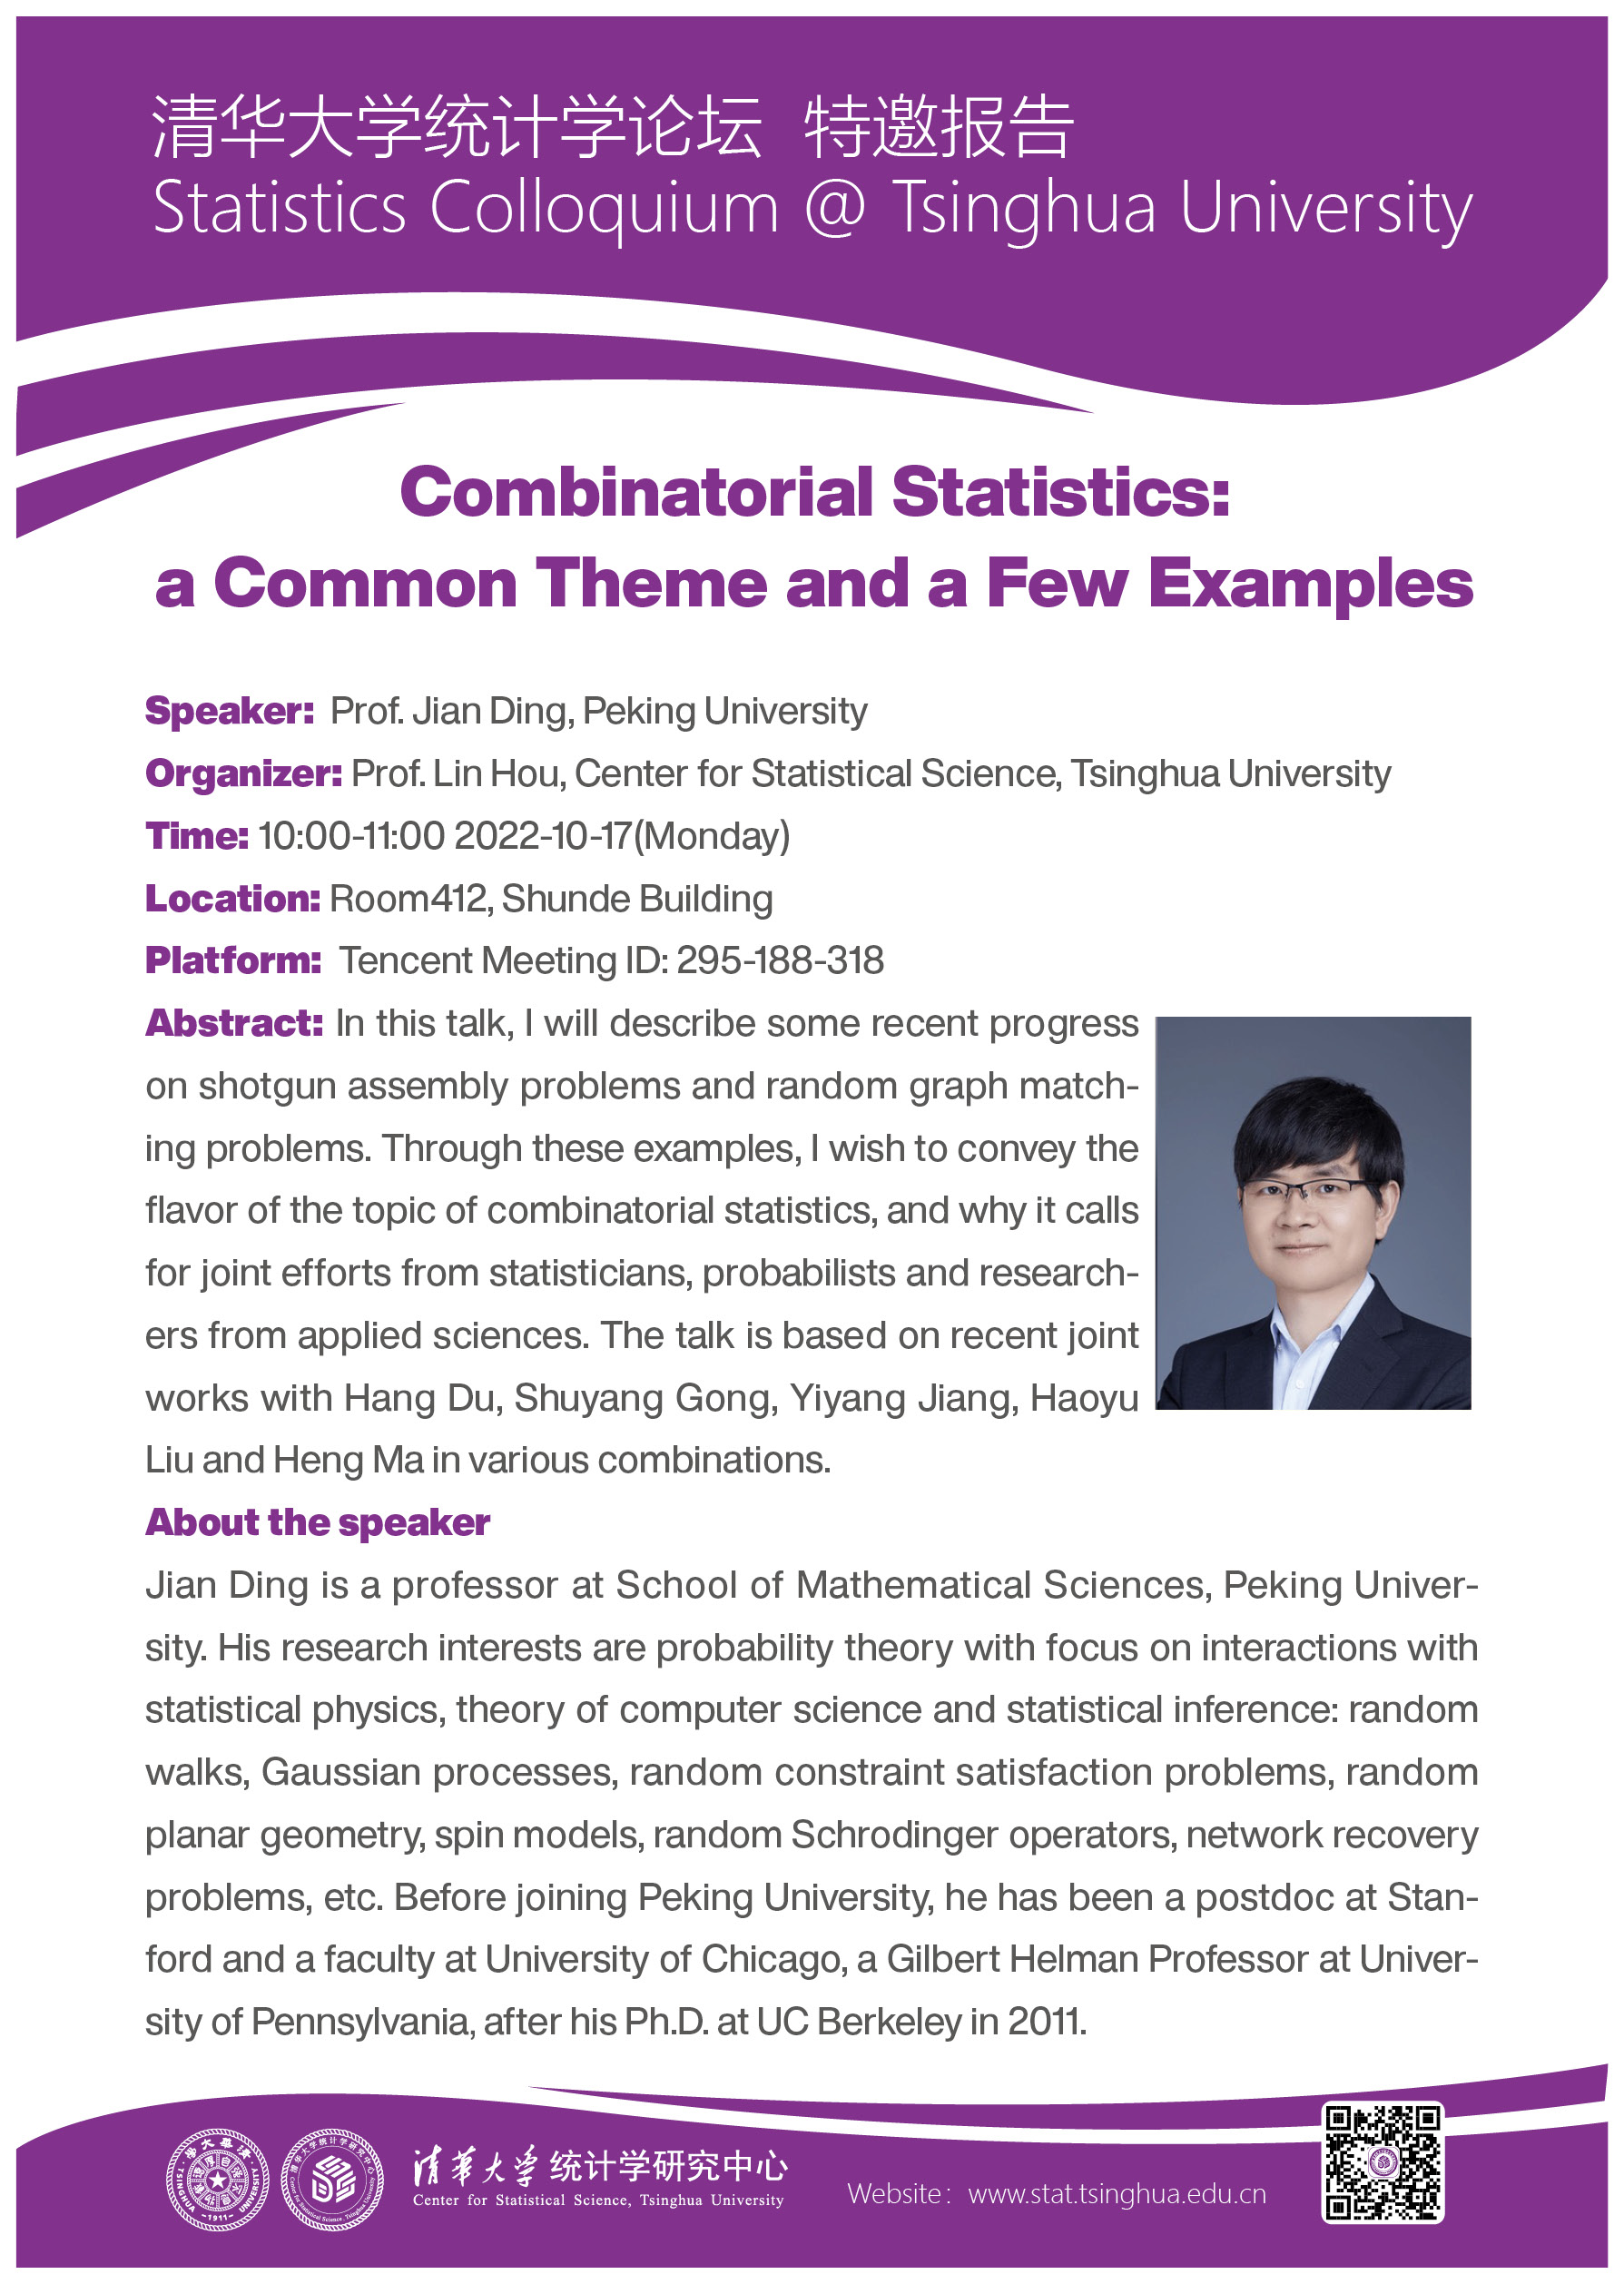 Combinatorial Statistics: a Common Theme and a Few Examples